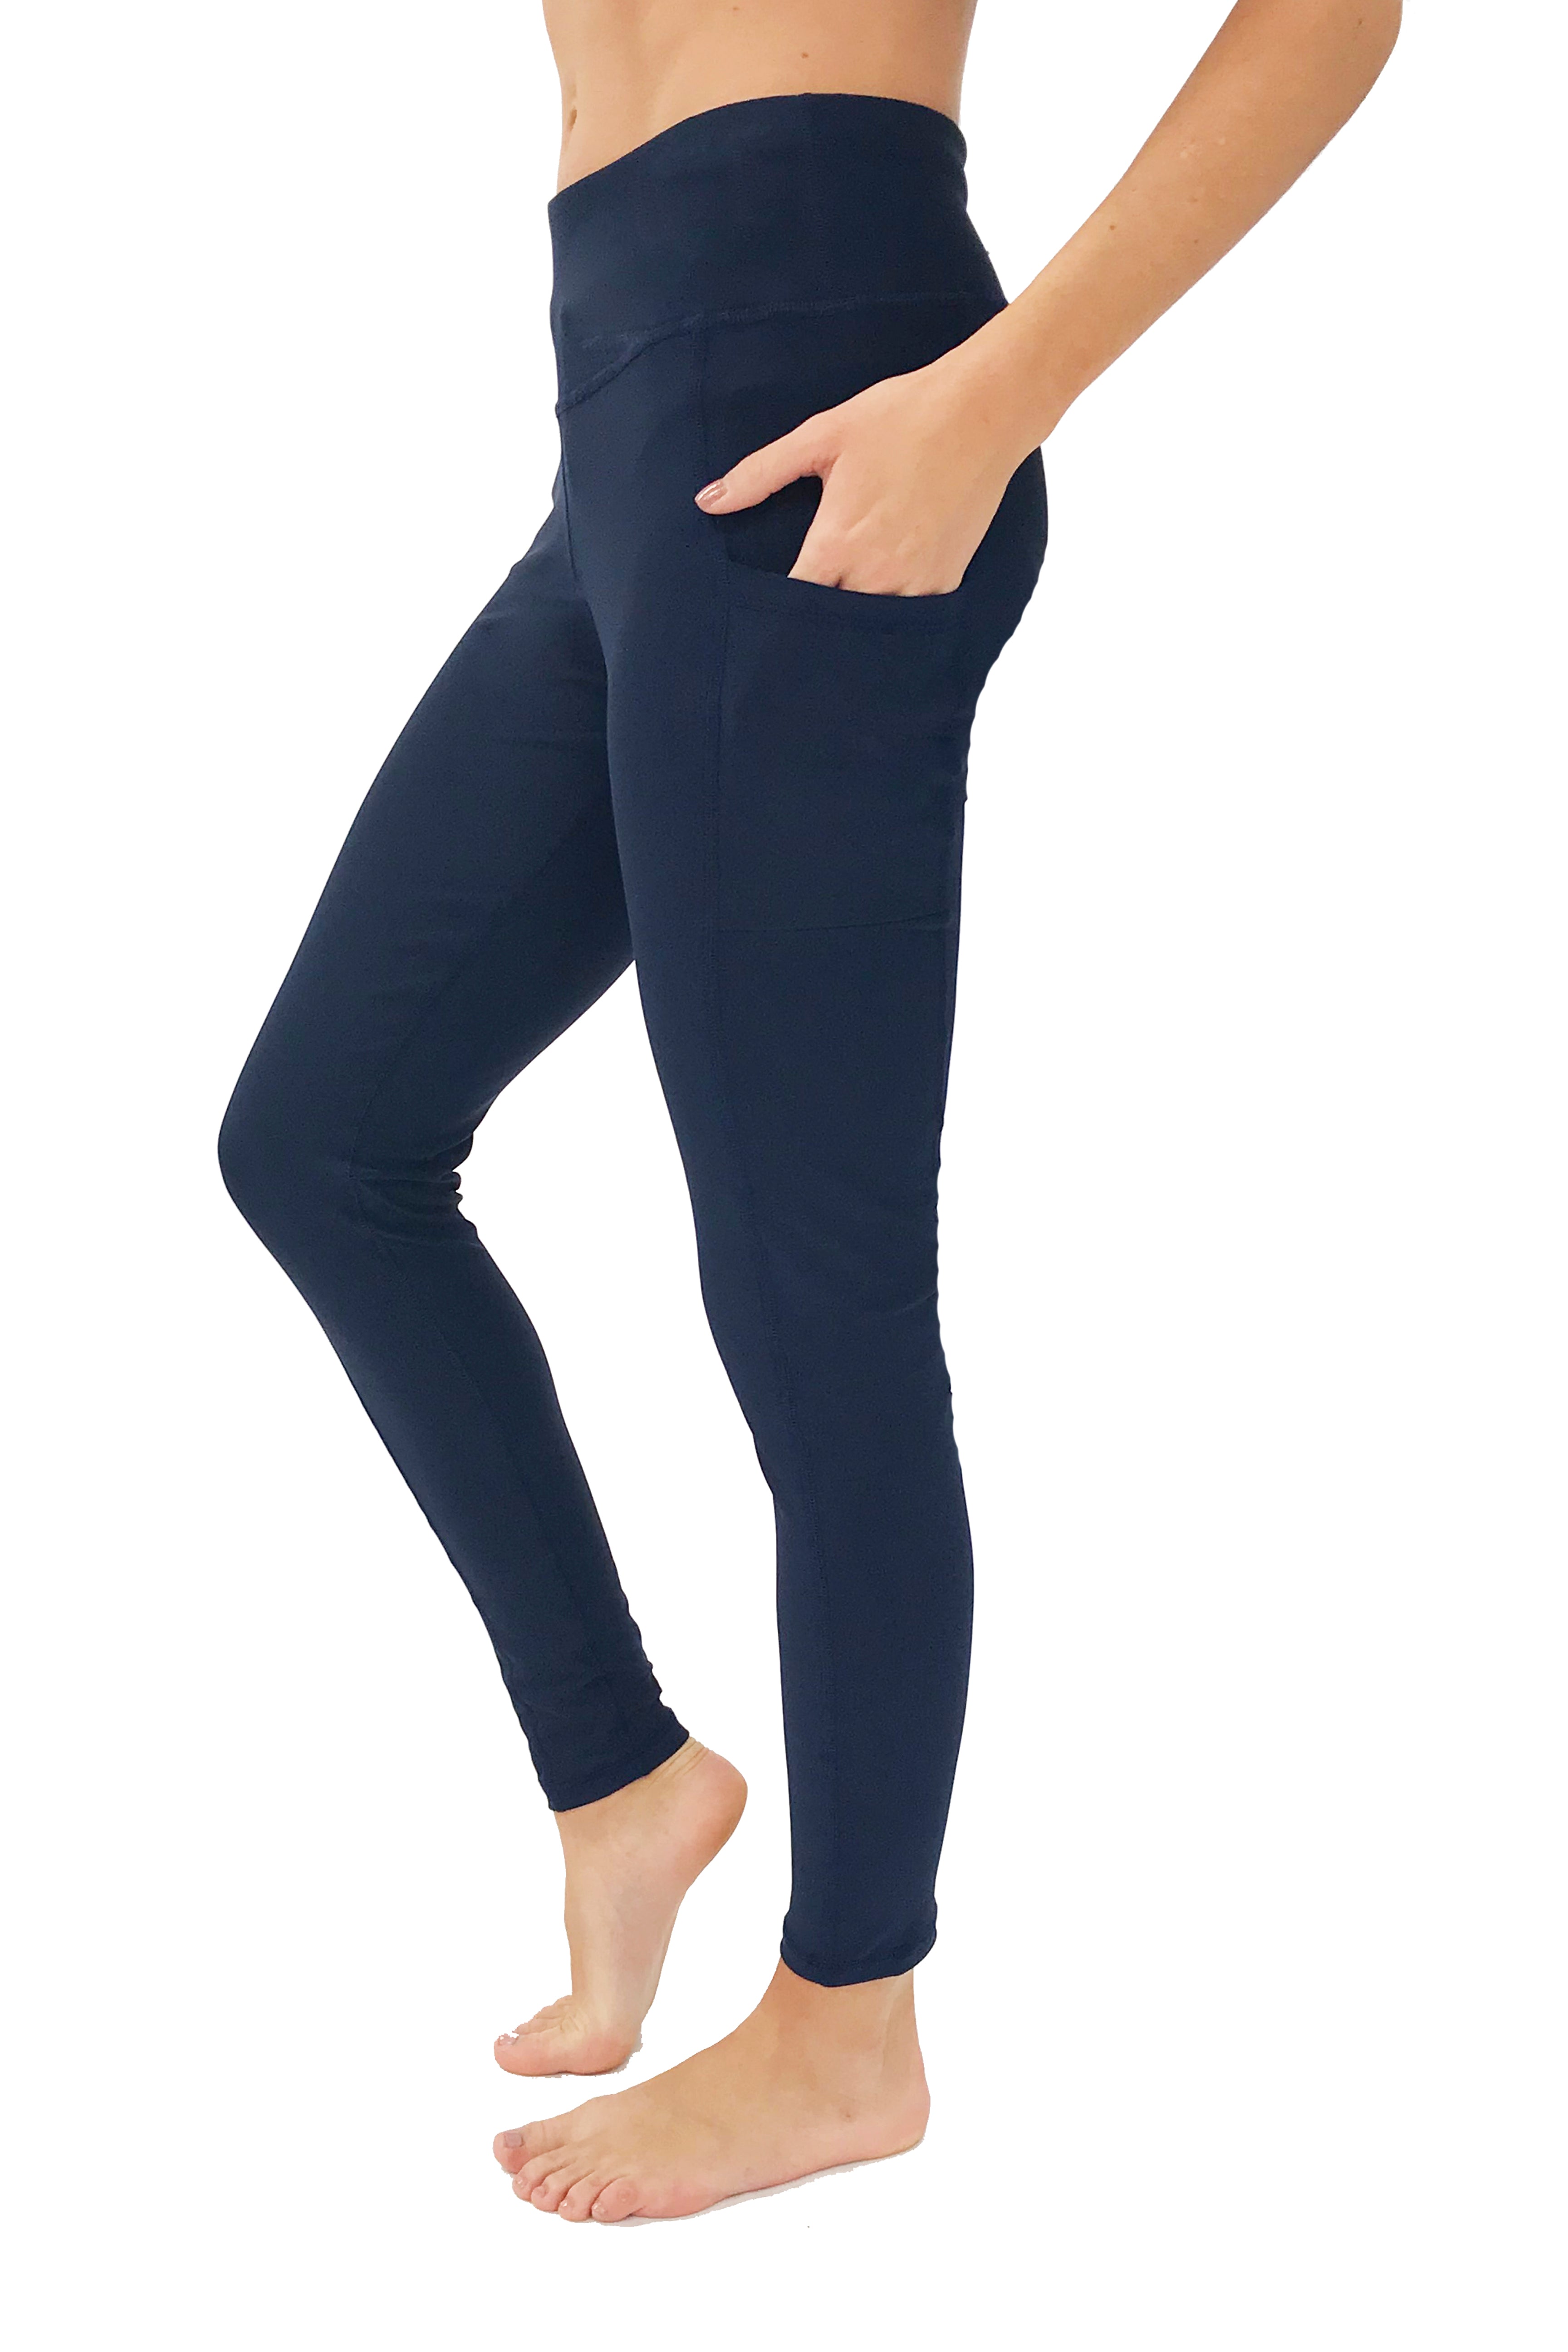 Leggings With Pockets For Phone  International Society of Precision  Agriculture